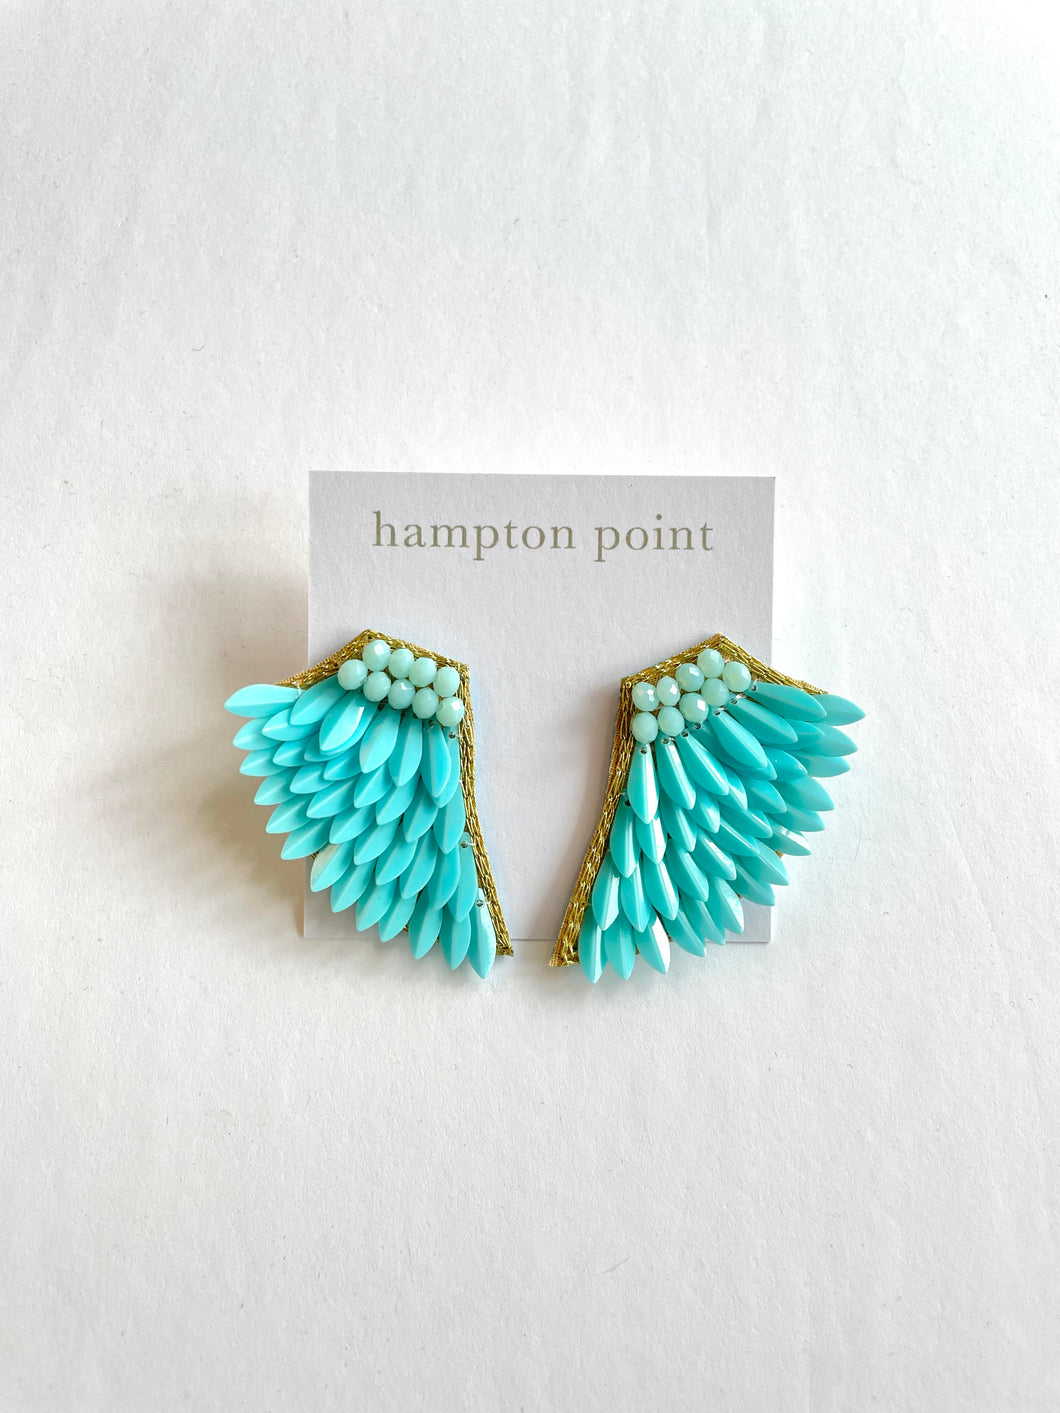 Turquoise sequin and beaded wing earrings. Light weight. About 2.5